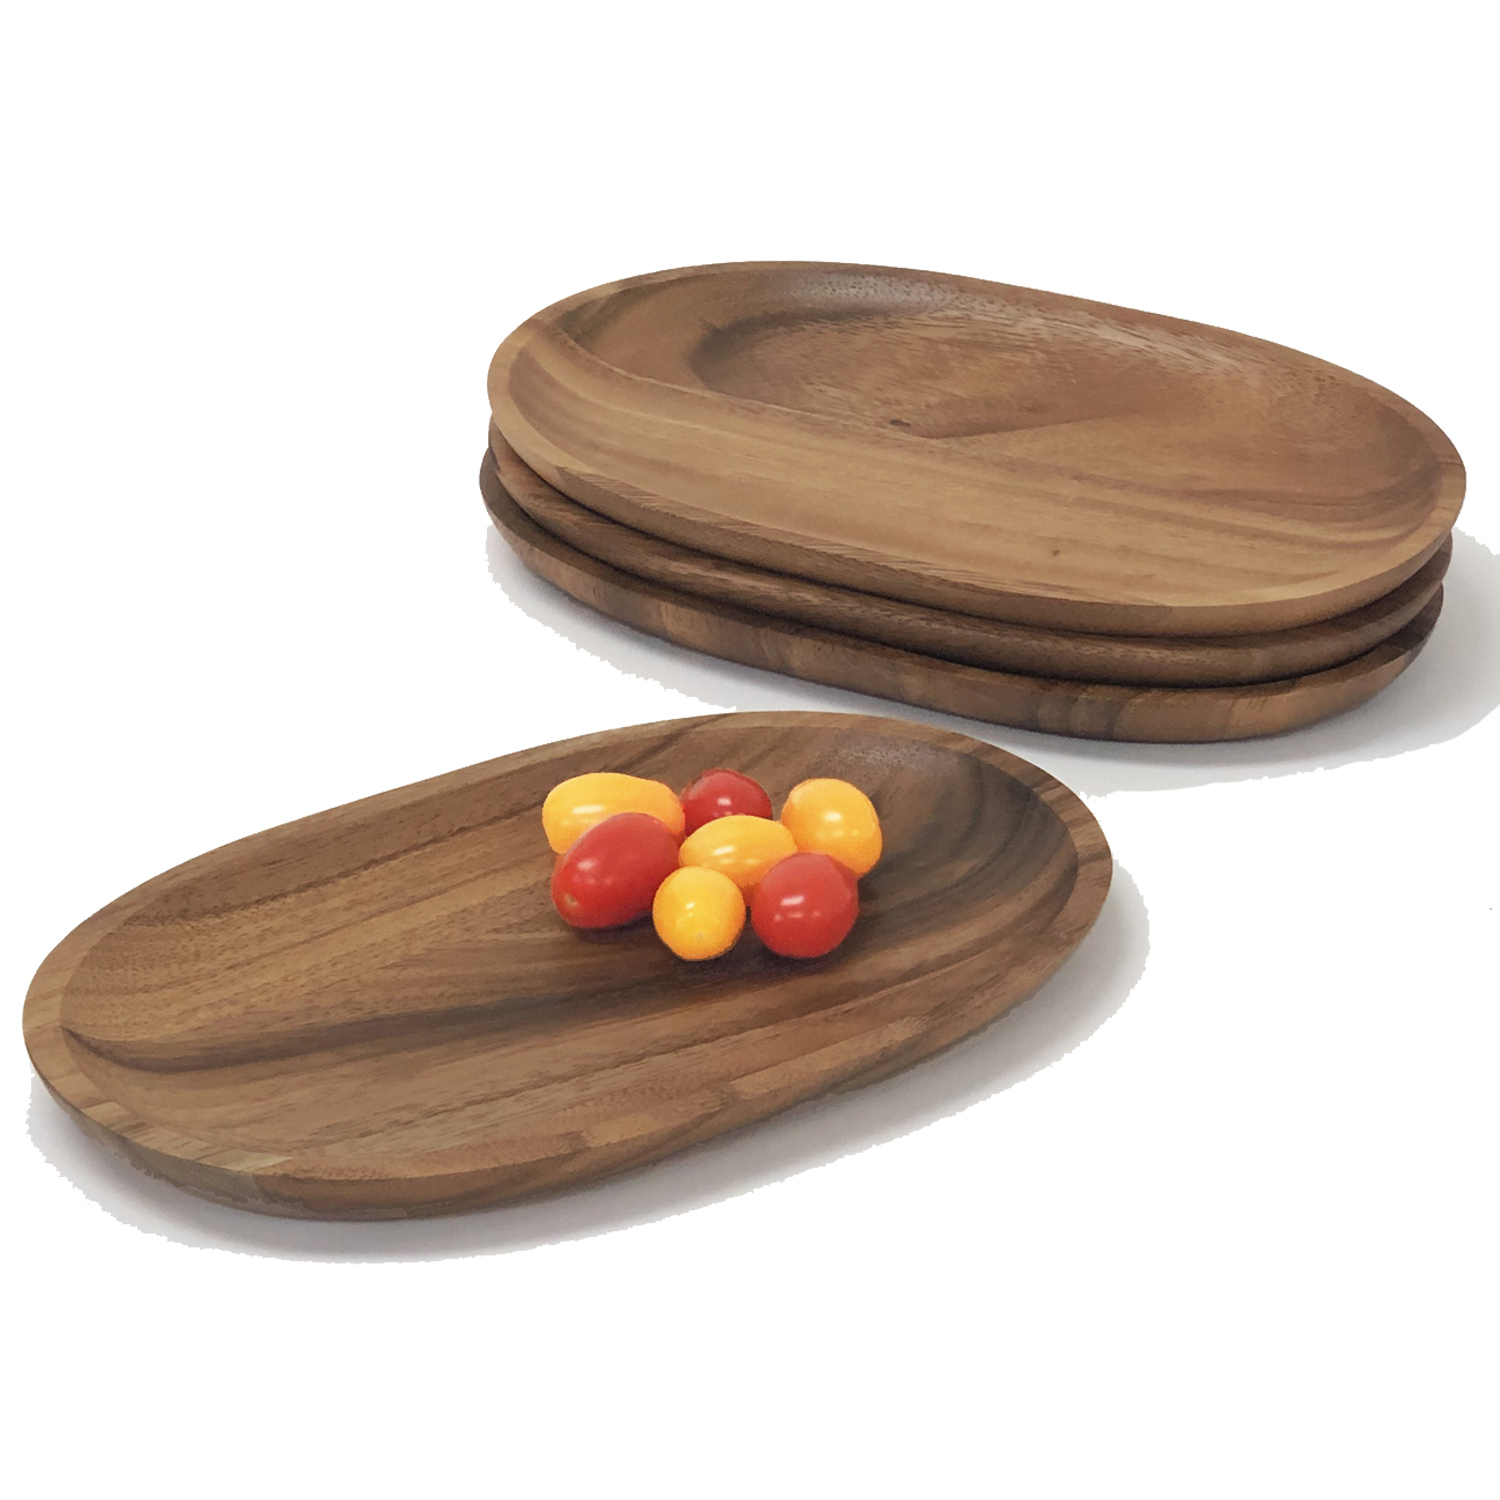 Oval Serving Tray / Platter, 4-Piece Set, Acacia Wood, 6" x 10"